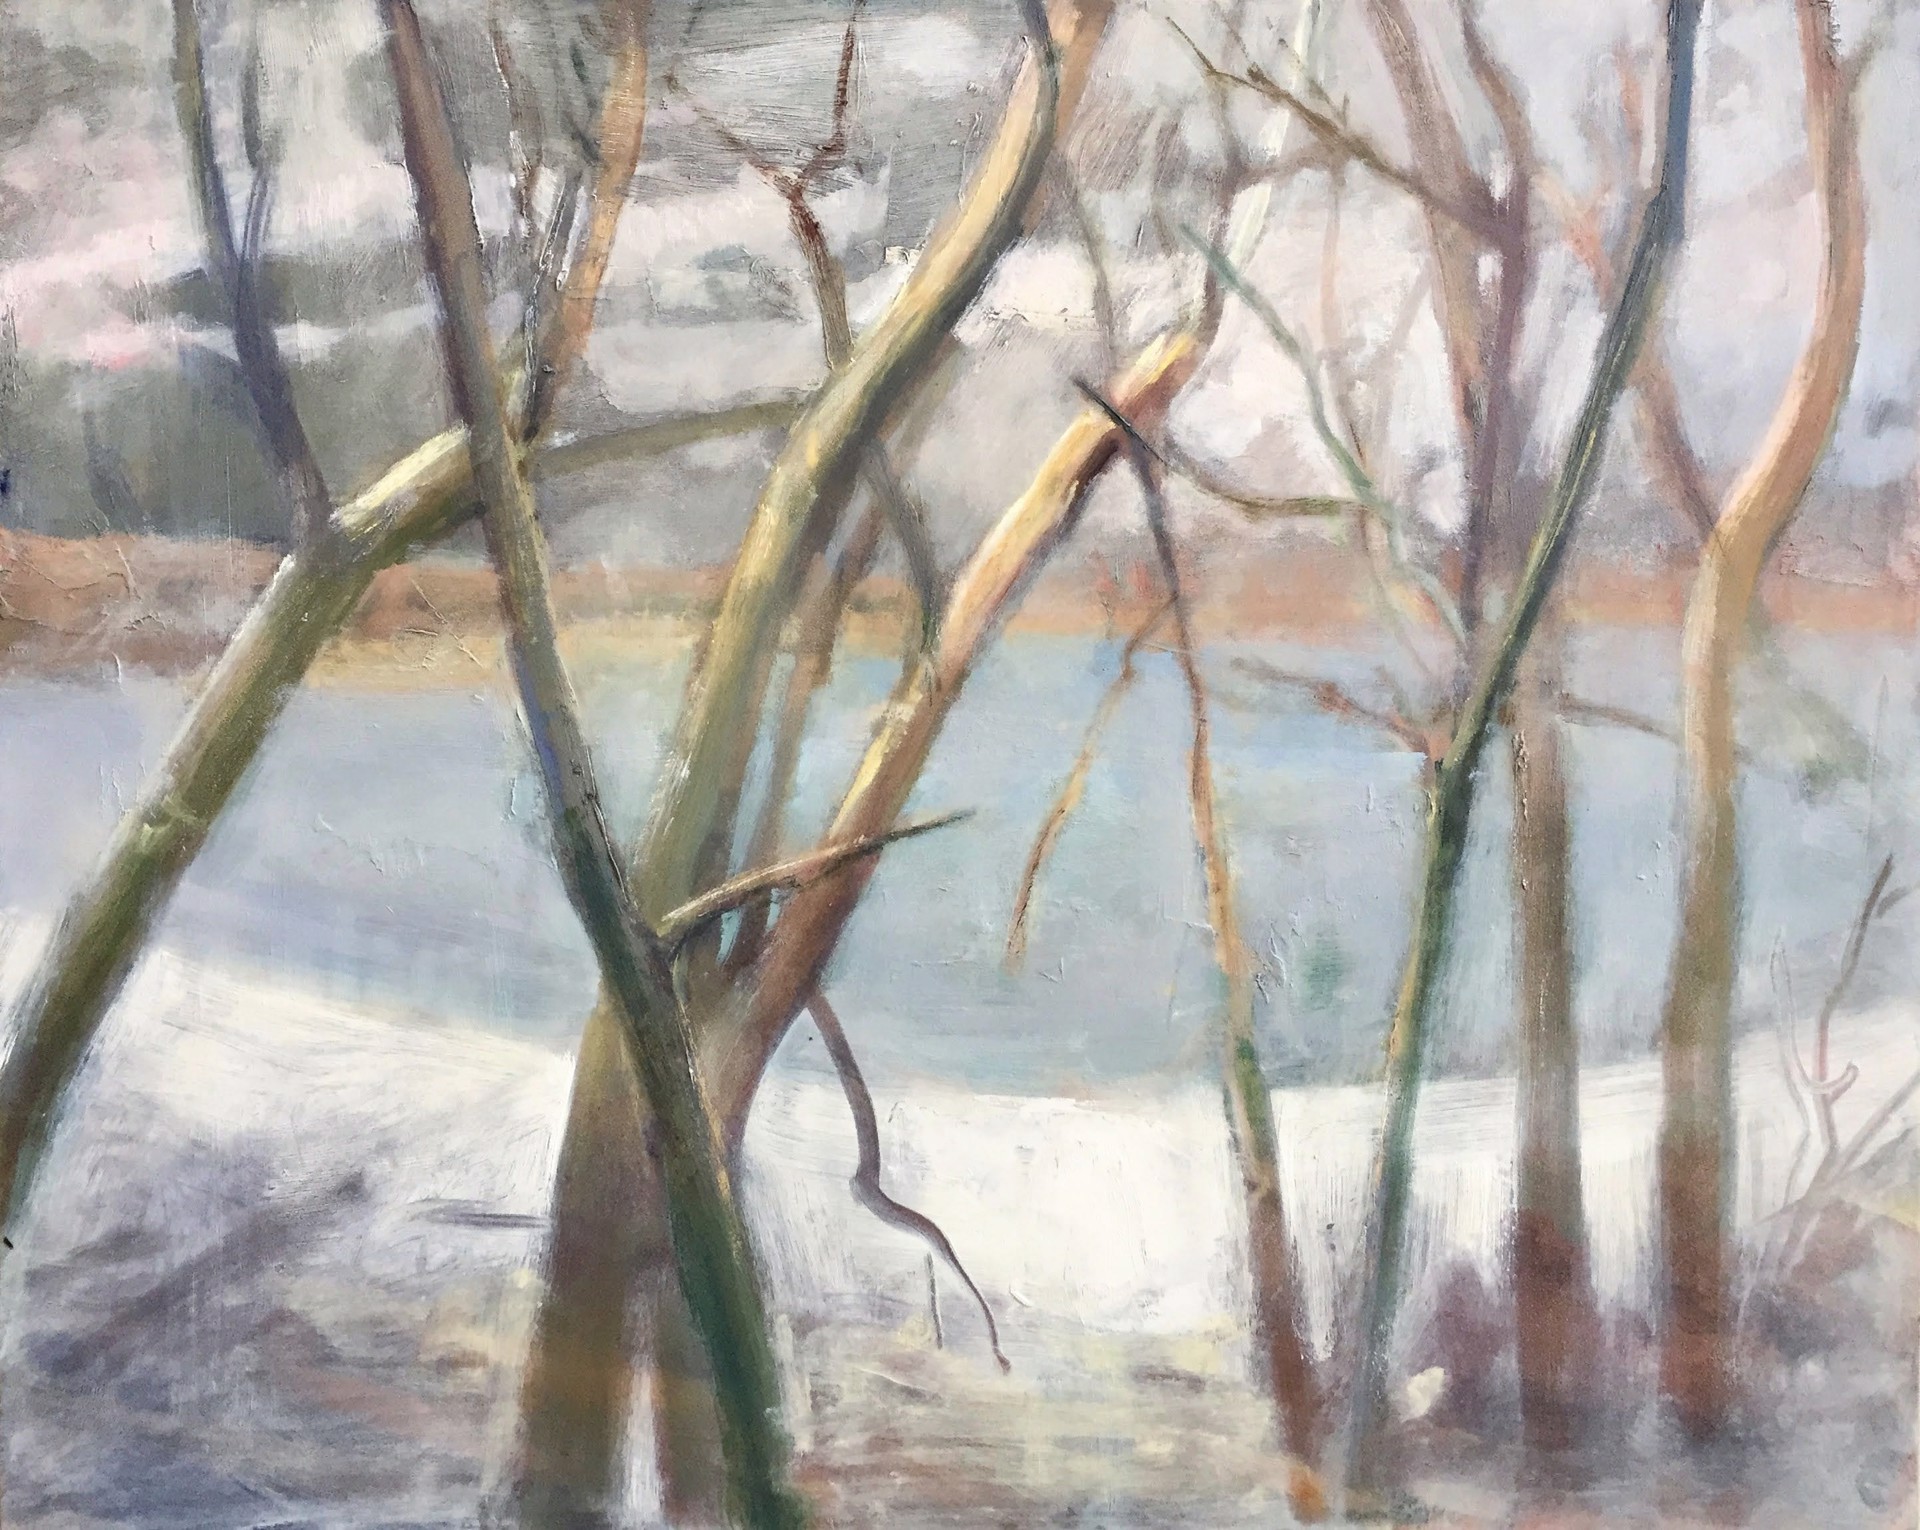 Ponds Edge (Winter) by Donald Beal